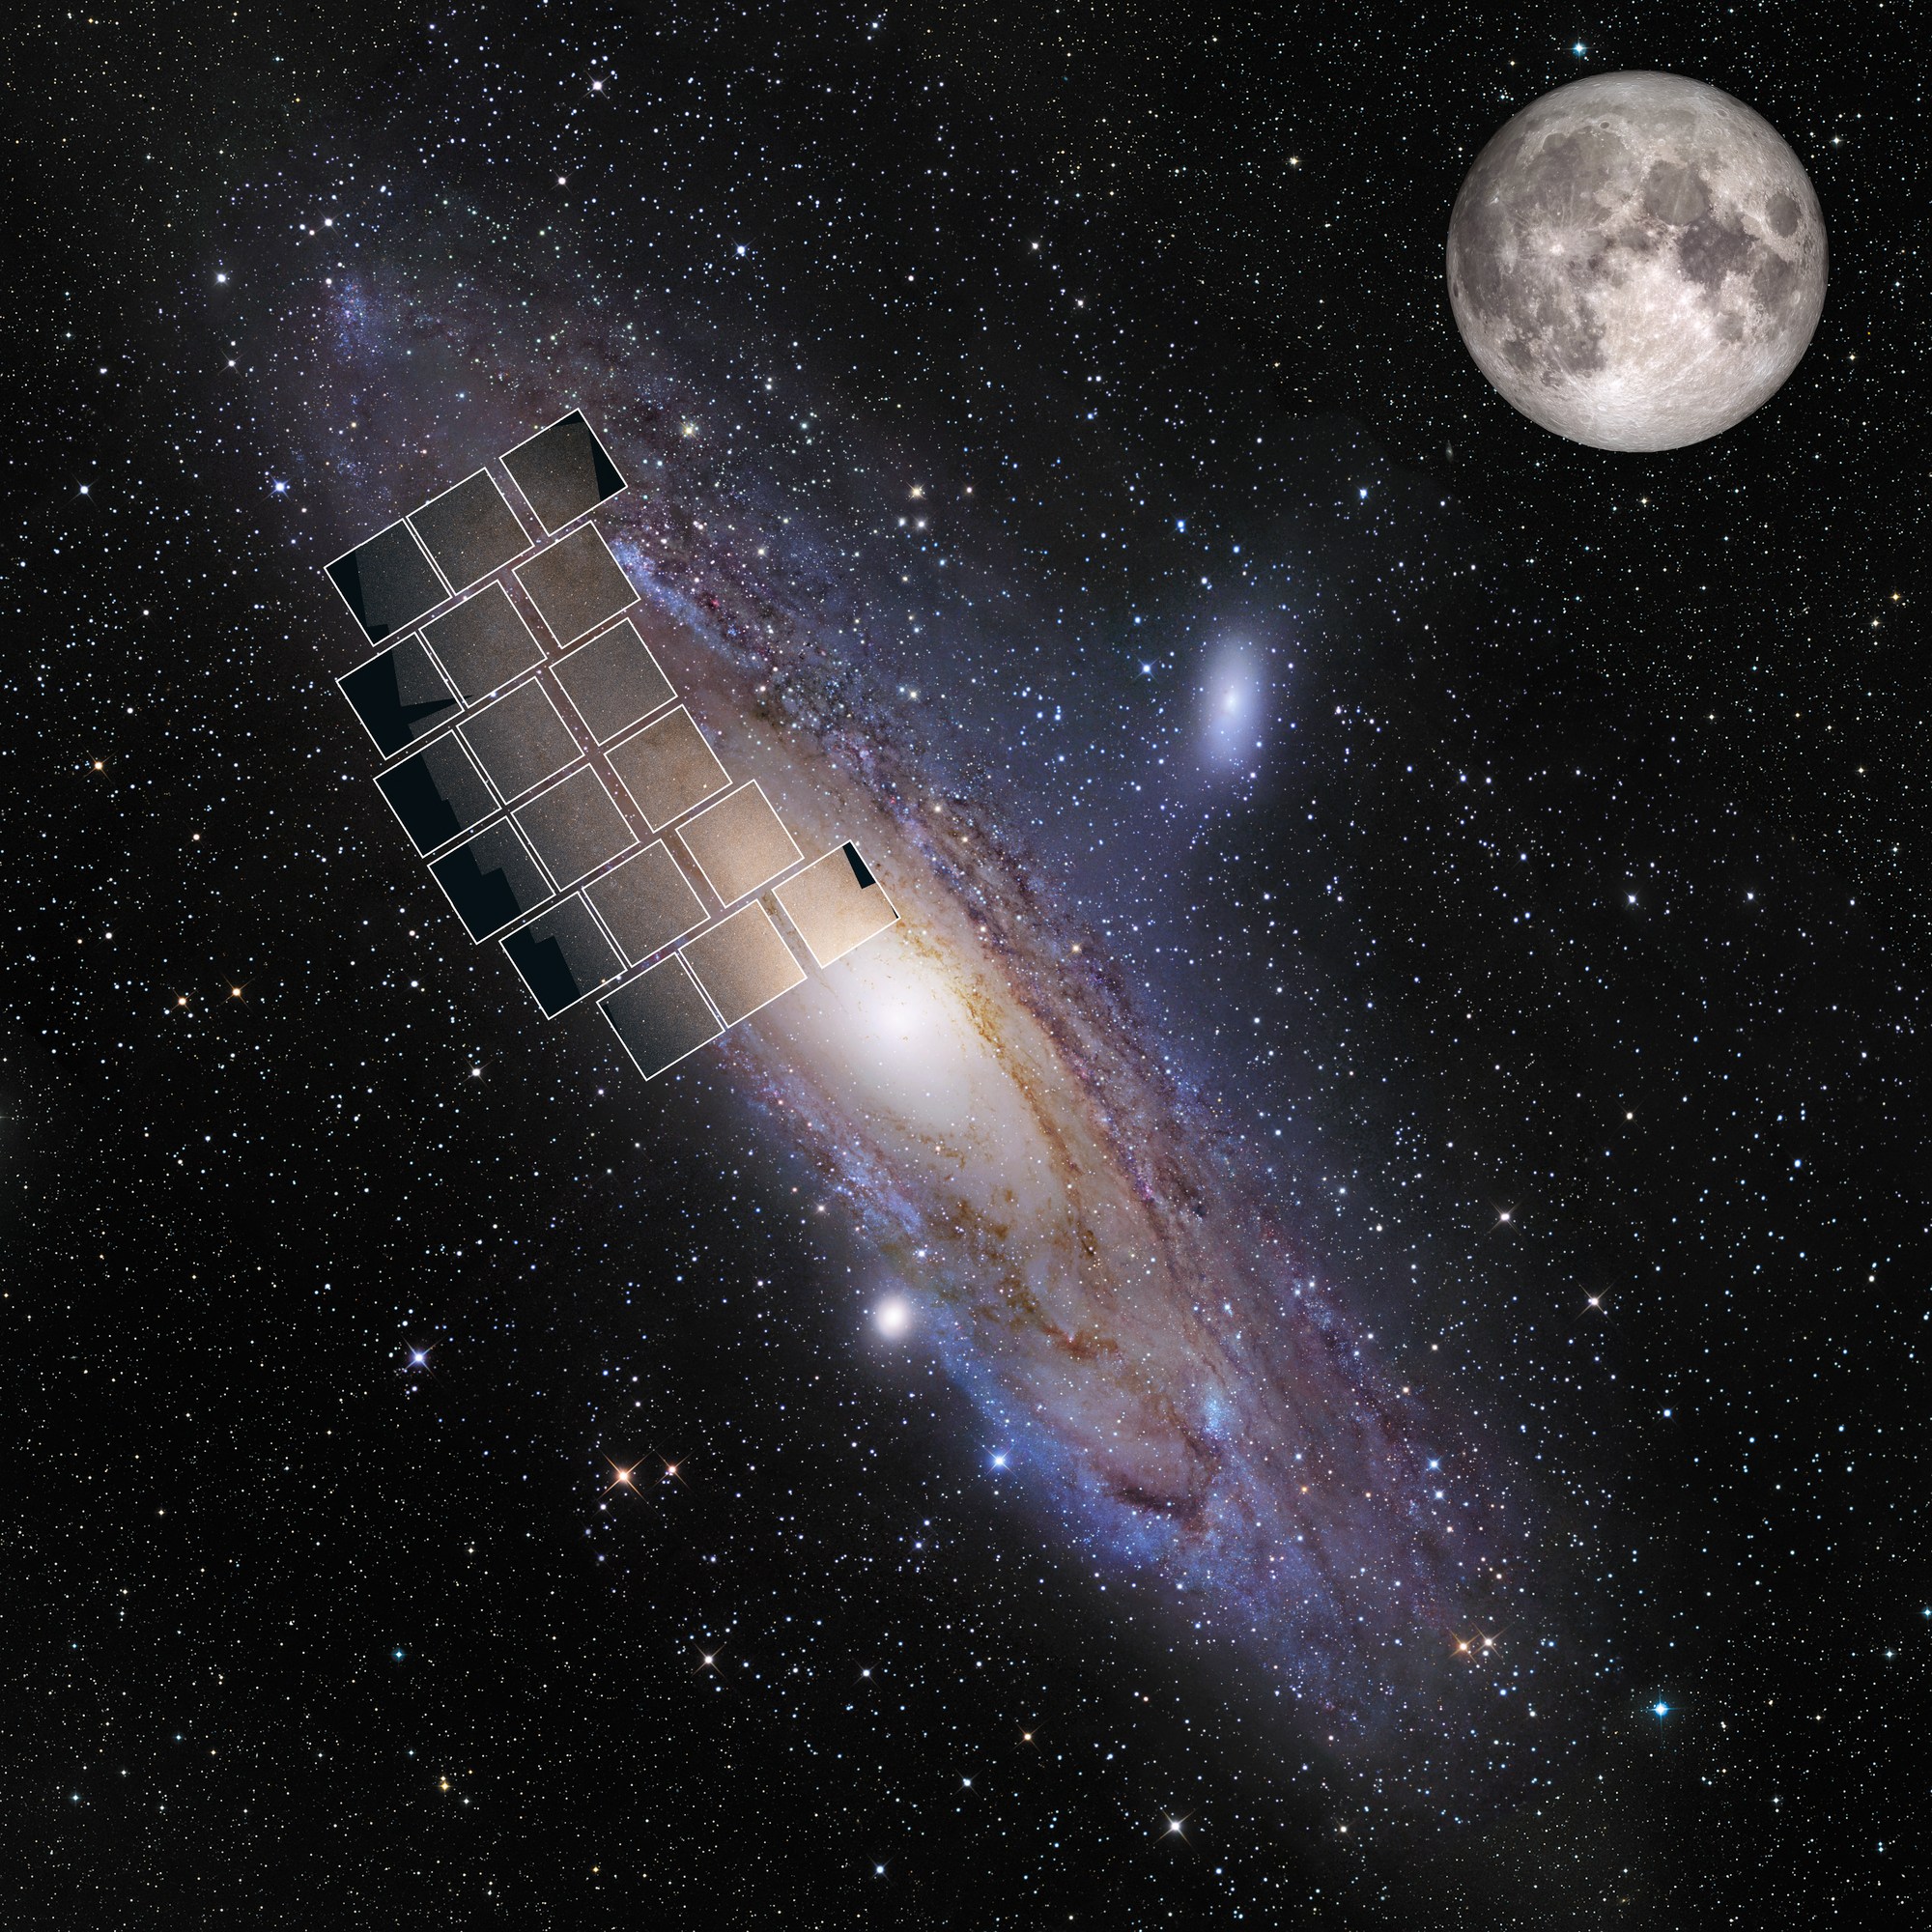 A photo of the Andromeda galaxy, which has a hazy yellow center surrounded by purplish, dusty tendrils of stars. The galaxy is oval shaped on a starry black background. The galaxy is overlaid with a series of 18 squares, arranged in three rows that curve slightly. The moon appears in the upper-right corner and is labeled "Moon to scale" - it's about the size of the squares all added together.